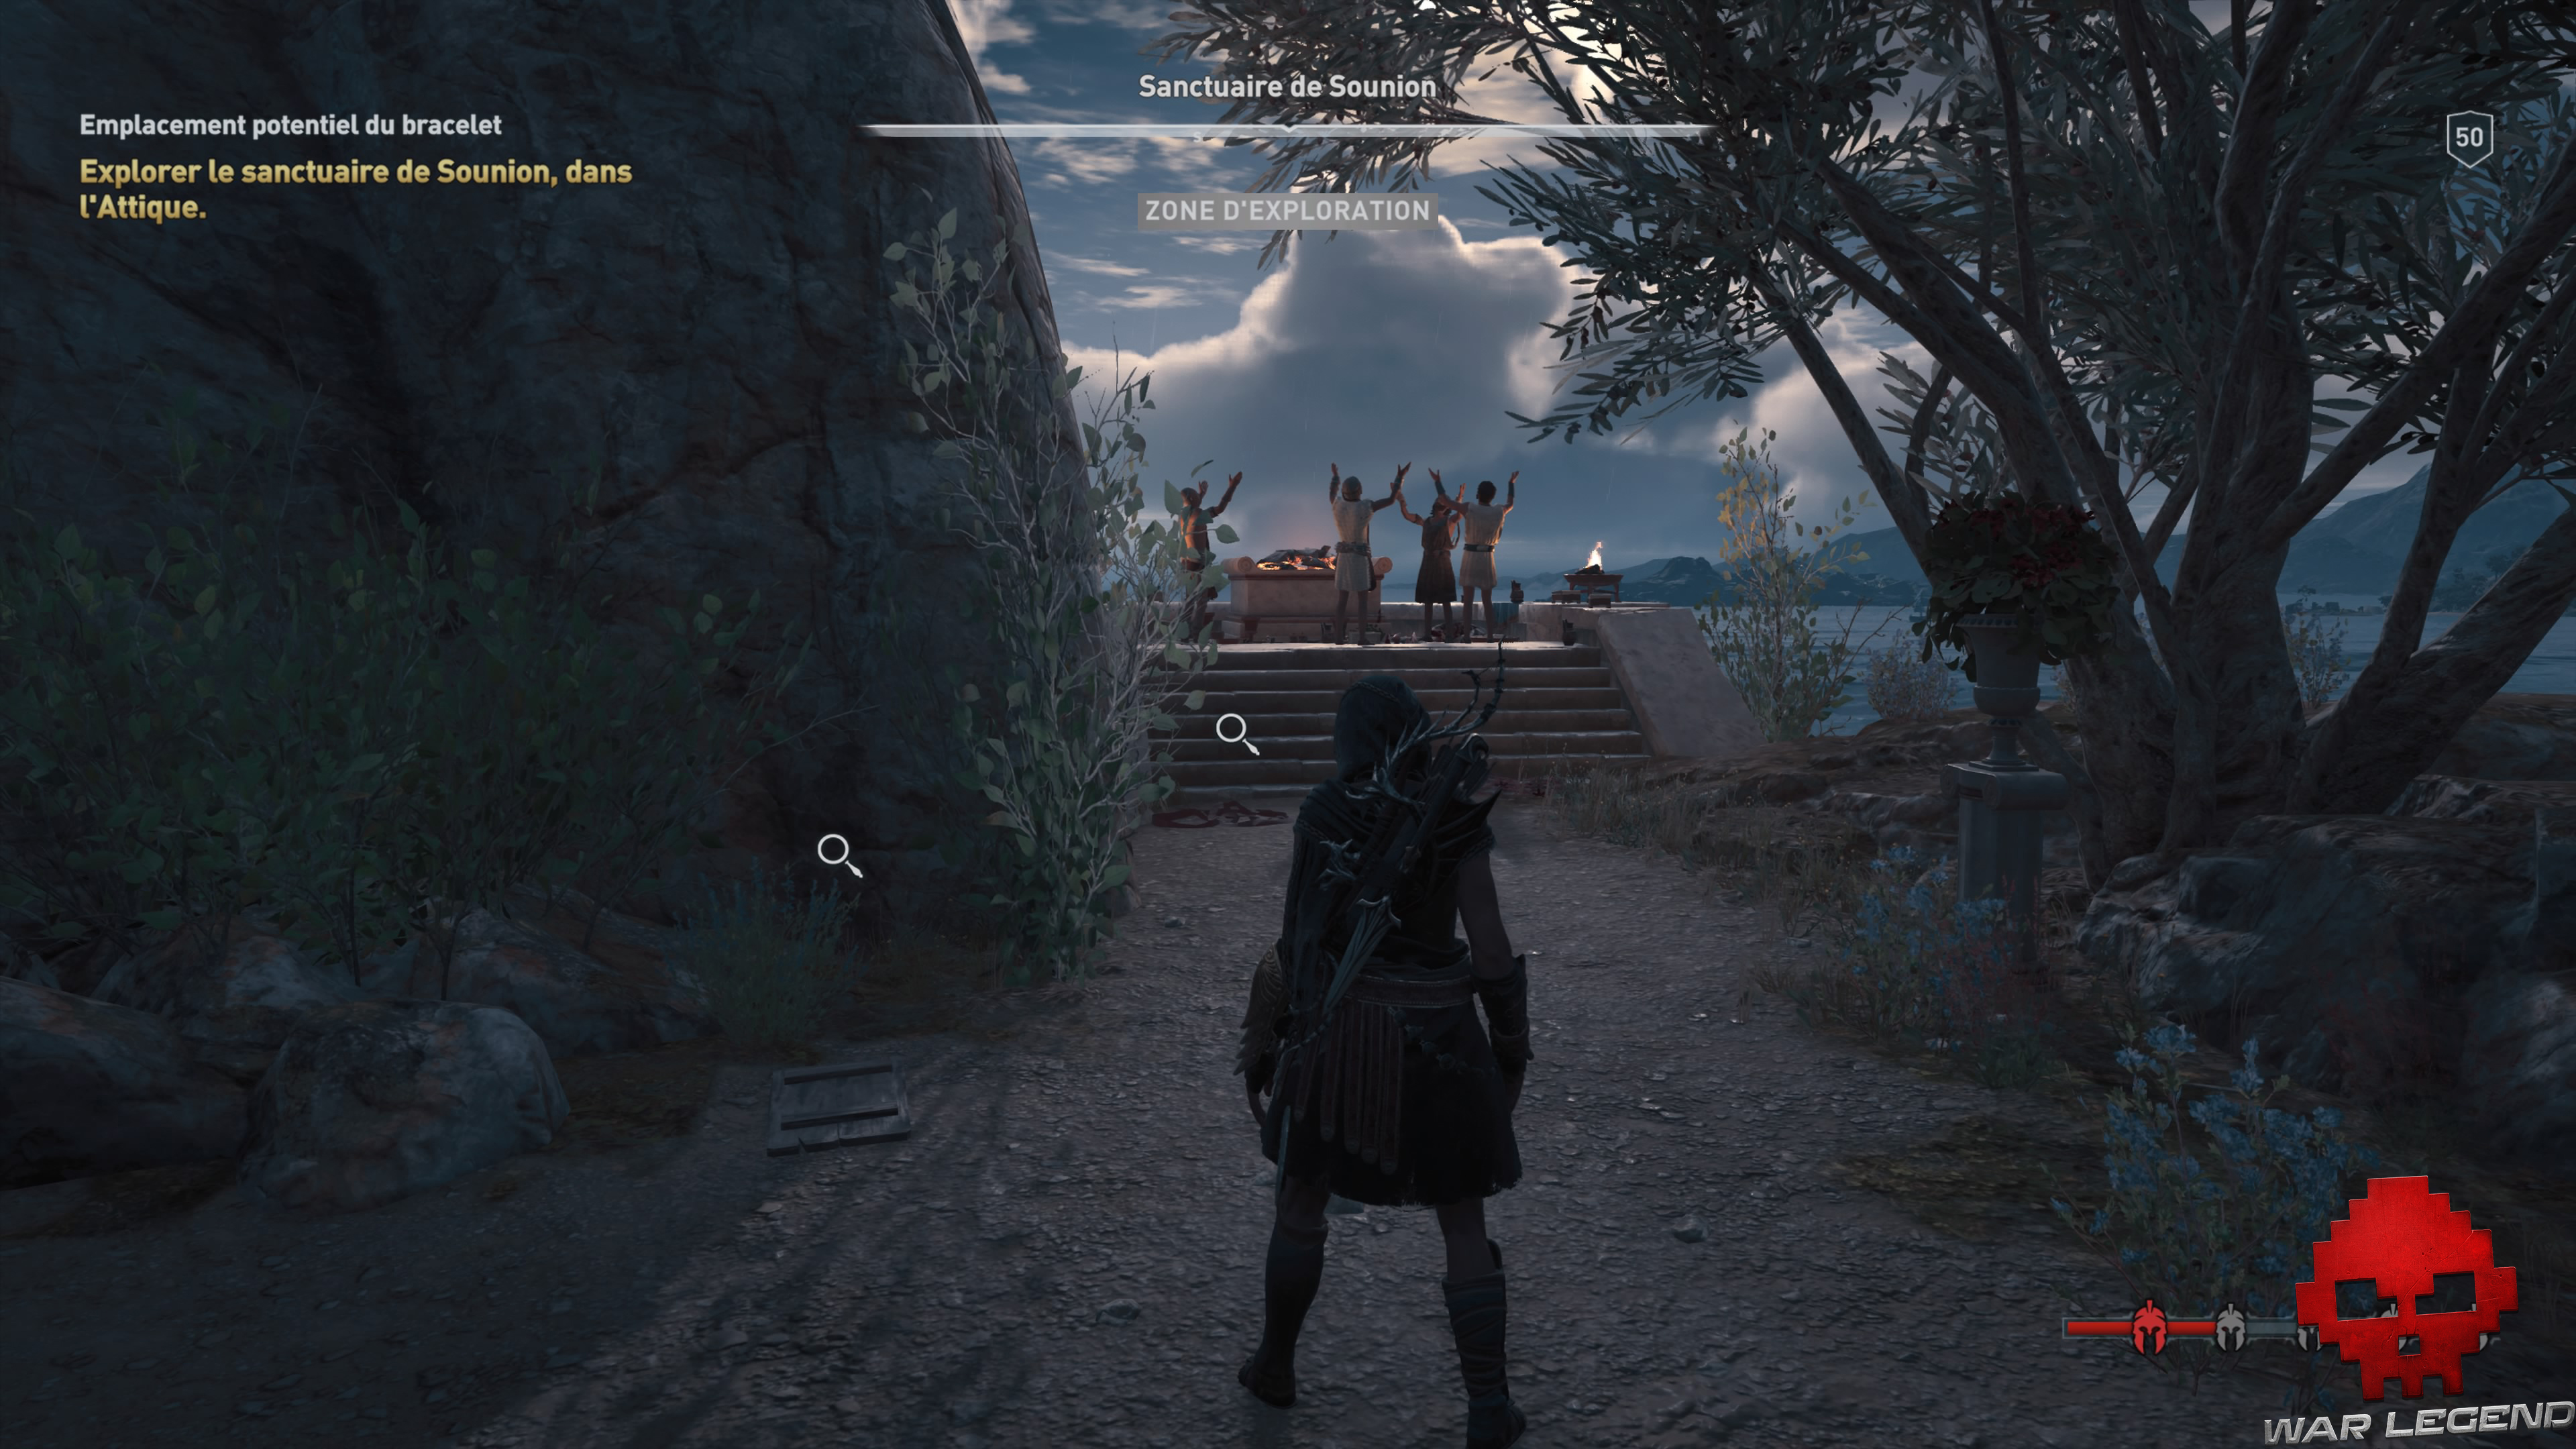 Guide assassin's creed odyssey cap sounion